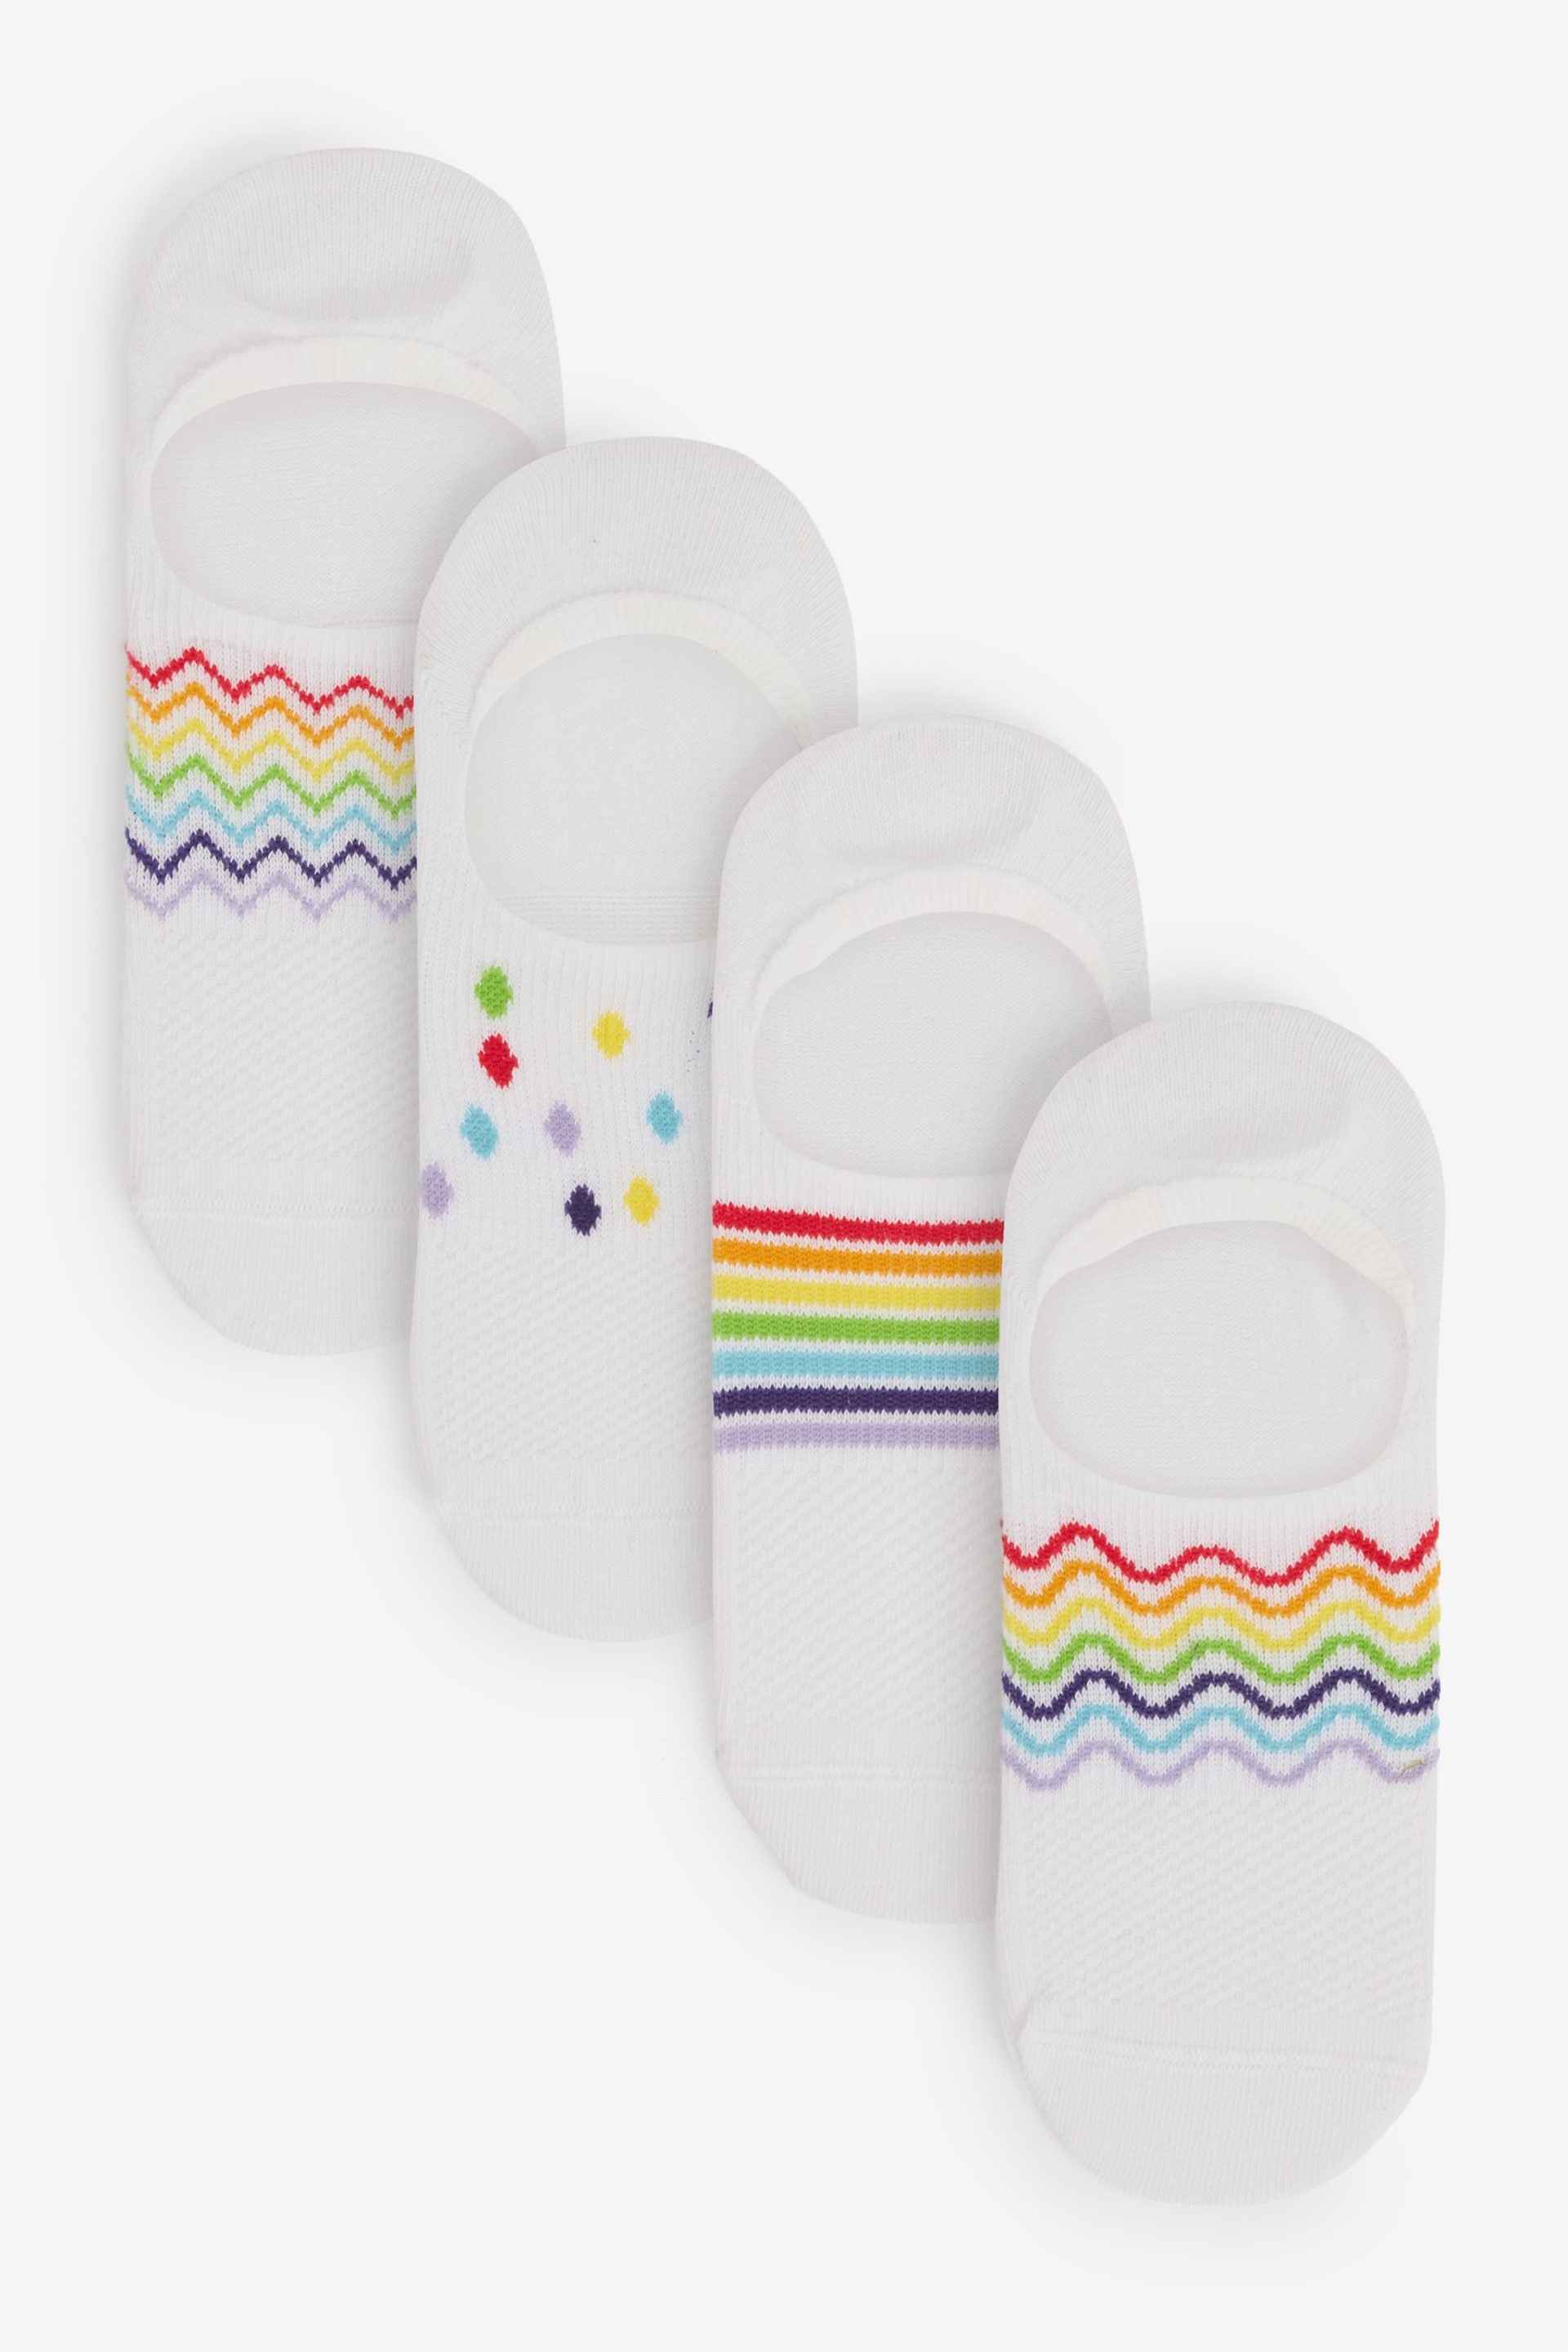 White/Rainbow High Cut Invisible Trainer Socks 4 Pack - Image 1 of 5